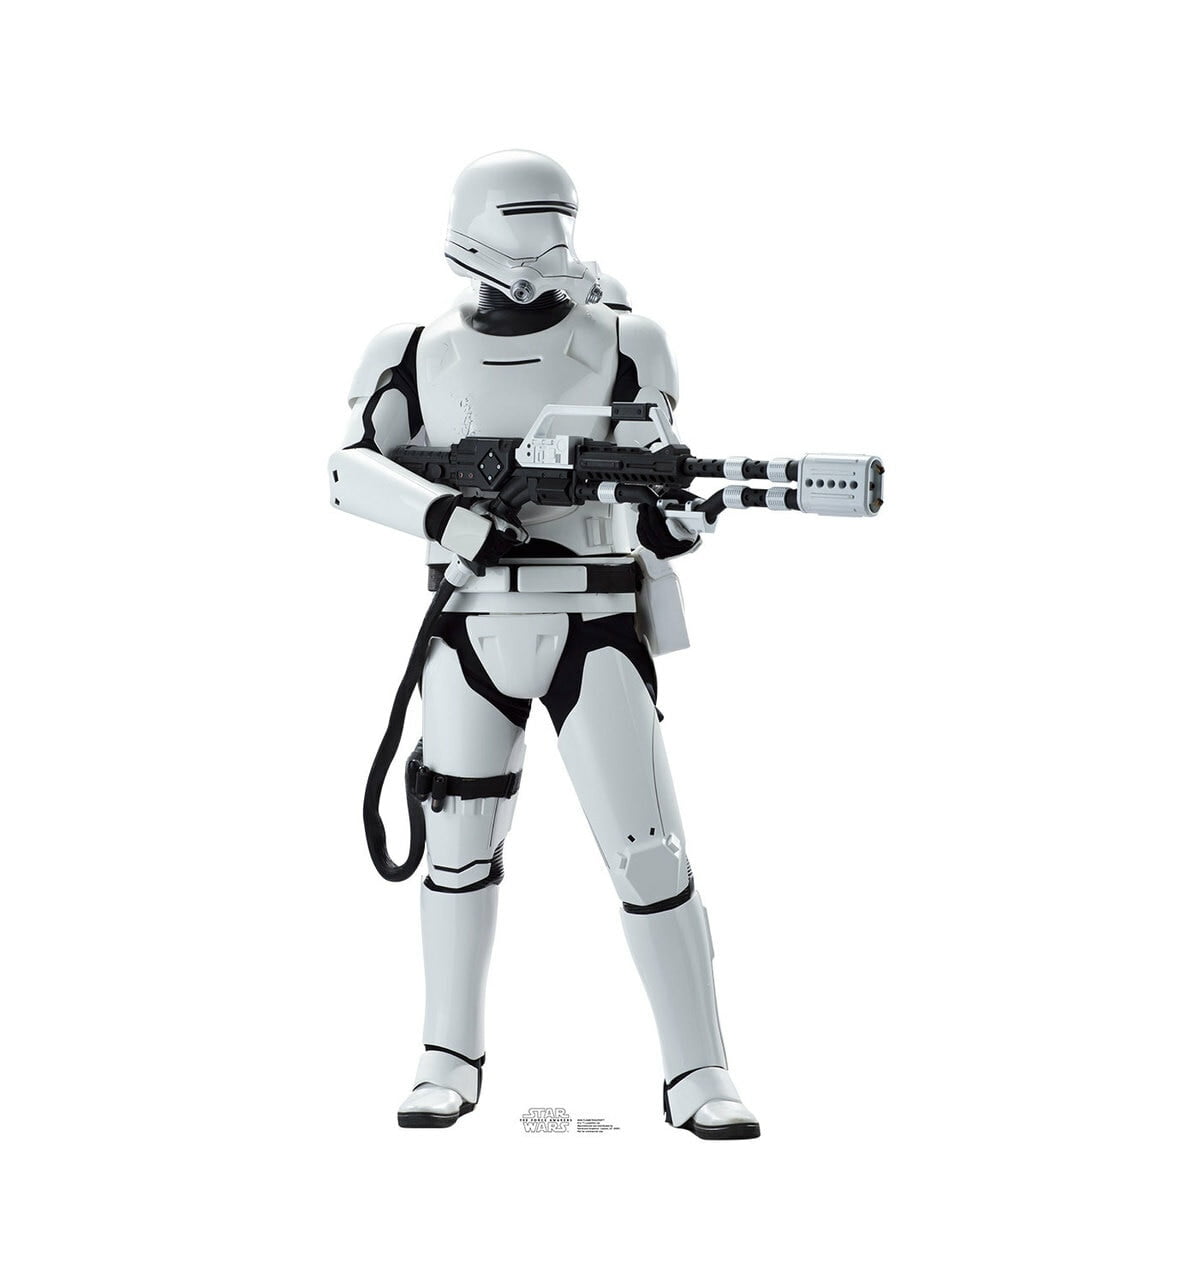 Picture of Advanced Graphics 2036 72 x 41 in. Flametrooper Cardboard Cutout, Star Wars VII - The Force Awakens